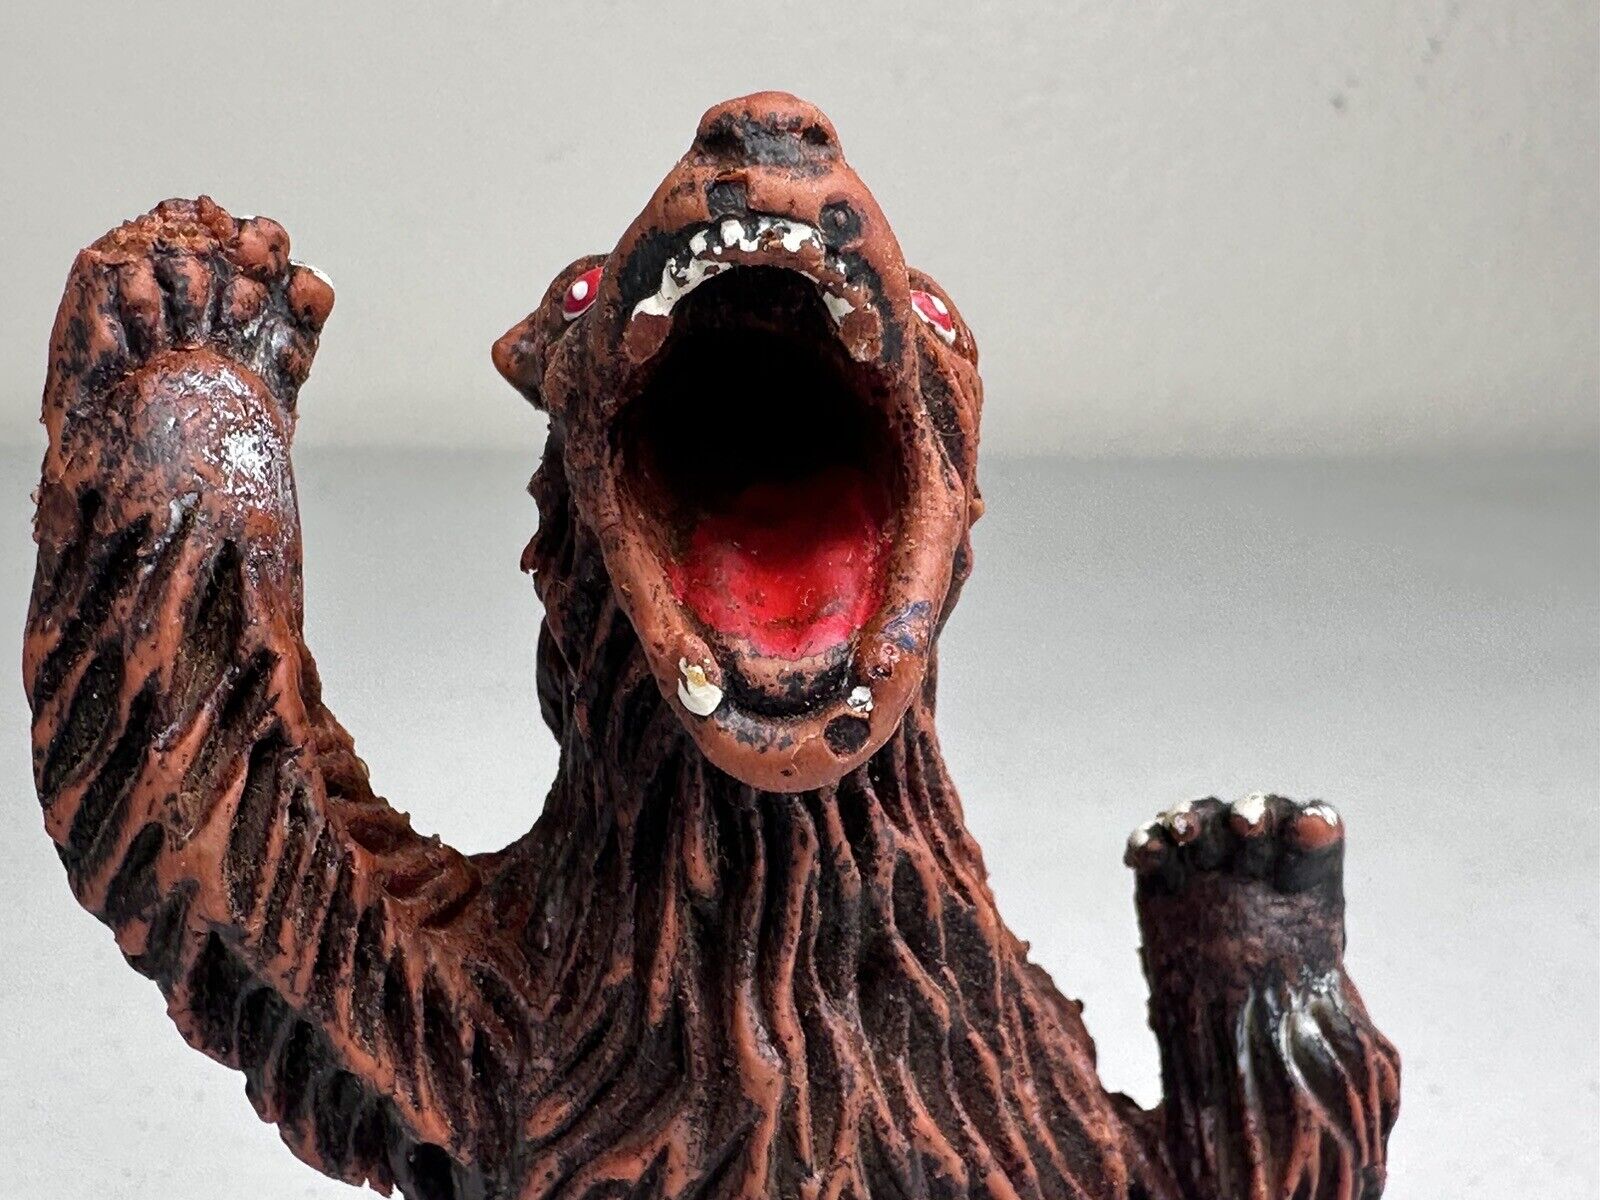 Rare 1970s Imperial Rubber Grizzly Bear Toy - Iconic Vintage Horror Collectible - TreasuTiques